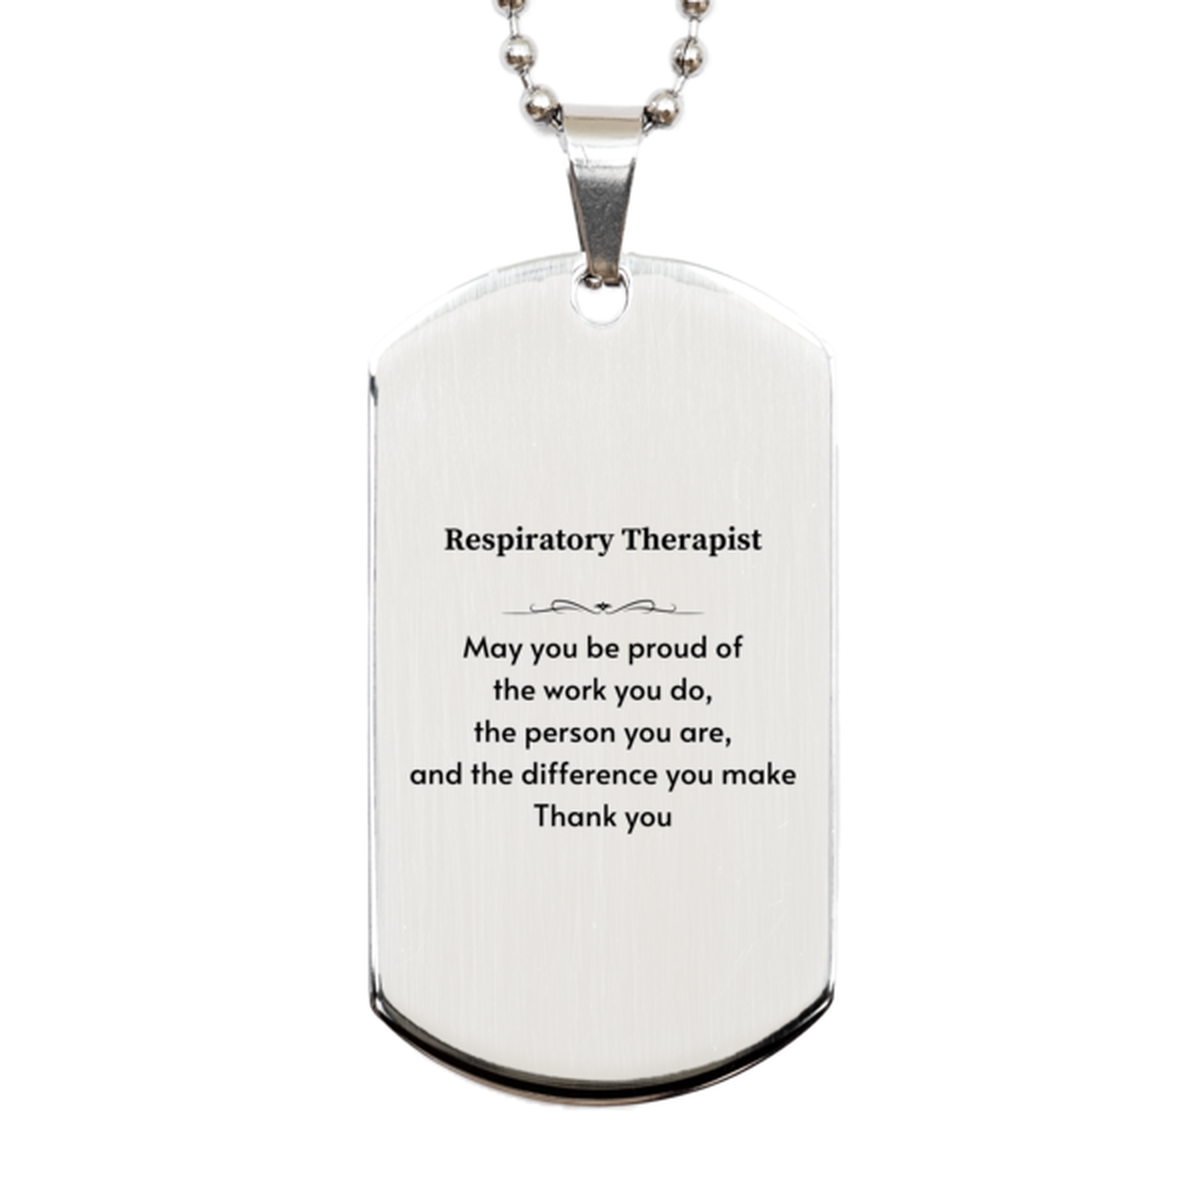 Heartwarming Silver Dog Tag Retirement Coworkers Gifts for Respiratory Therapist, Respiratory Therapist May You be proud of the work you do, the person you are Gifts for Boss Men Women Friends